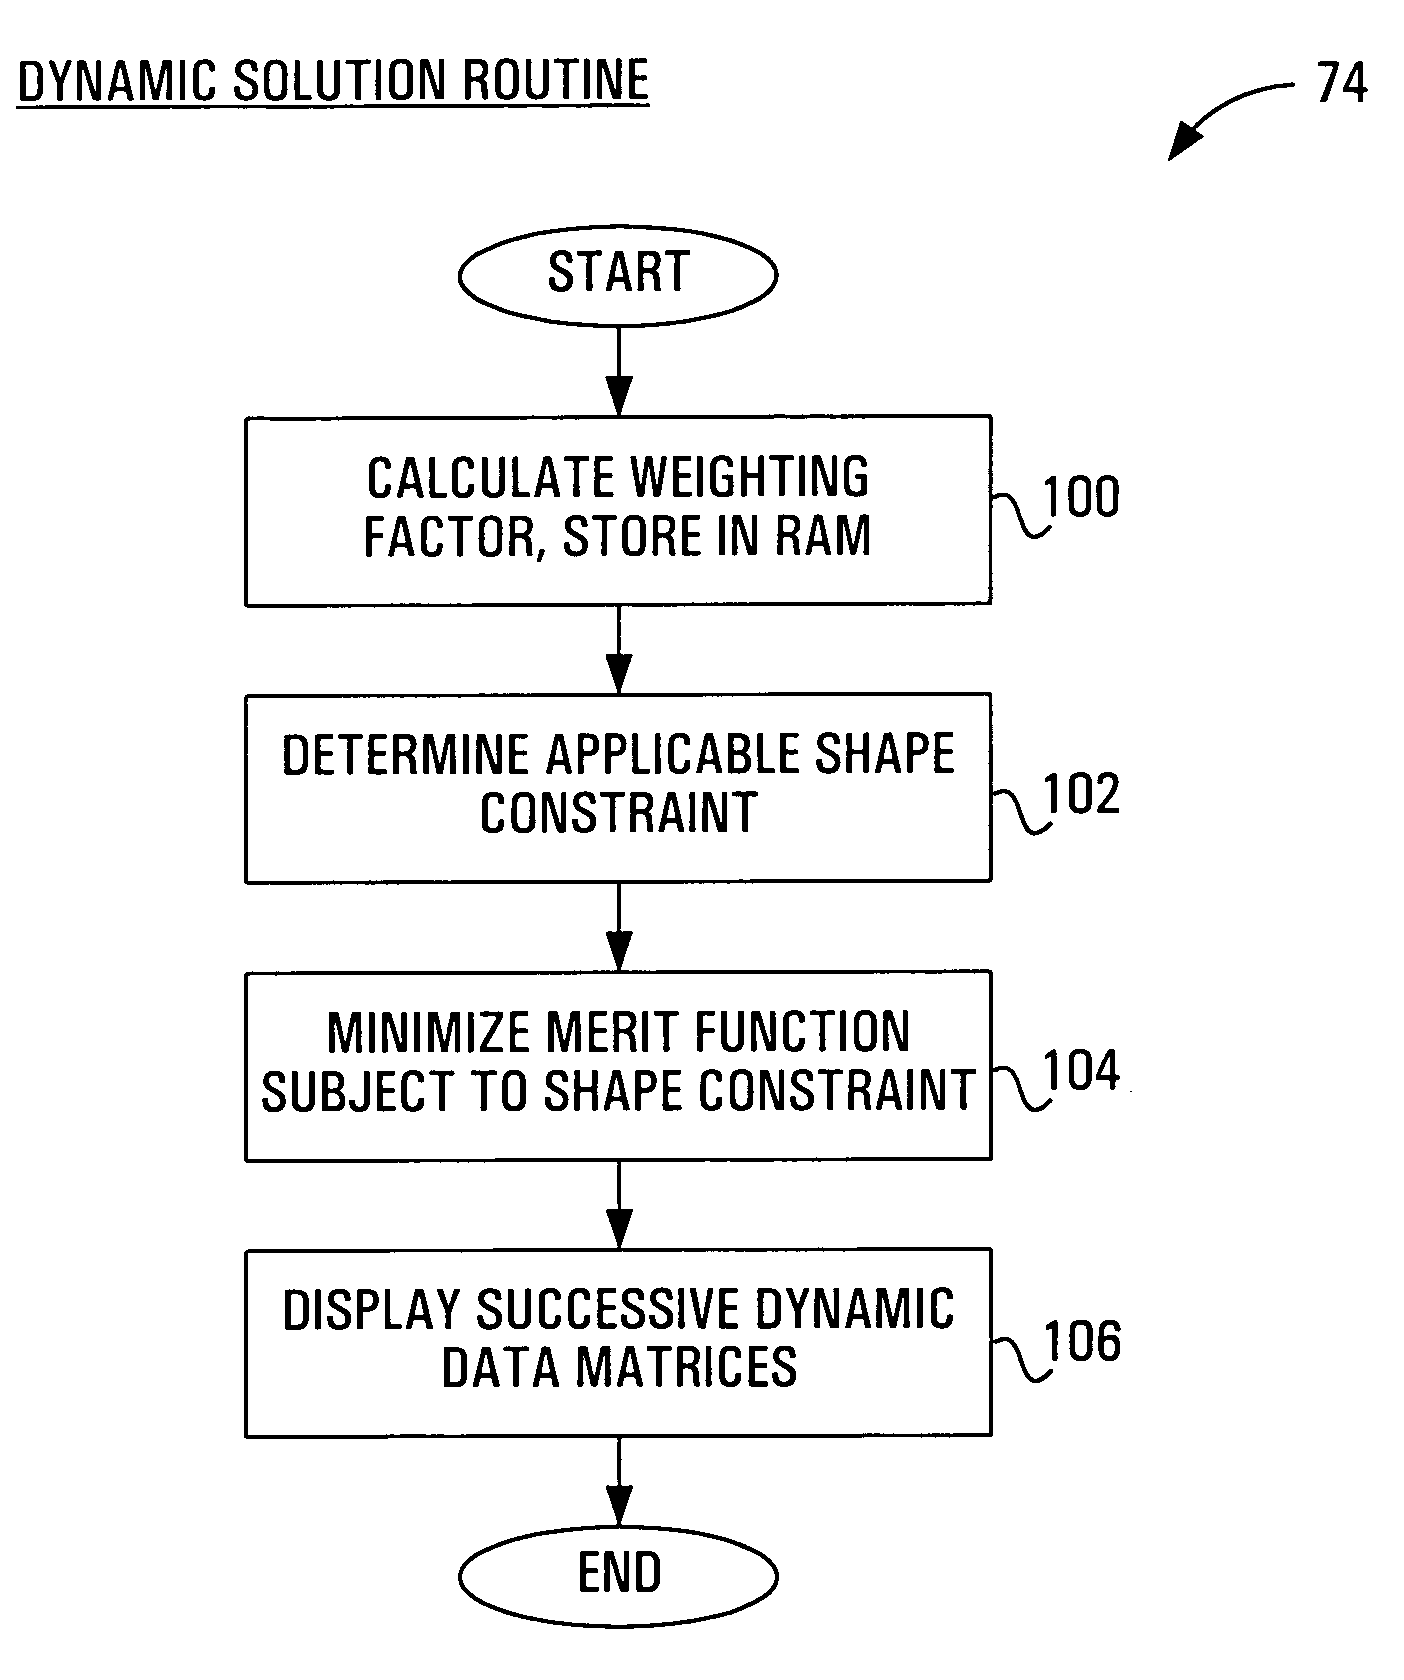 Method and apparatus for producing a representation of a measurable property which varies in time and space, for producing an image representing changes in radioactivity in an object and for analyzing tomography scan images